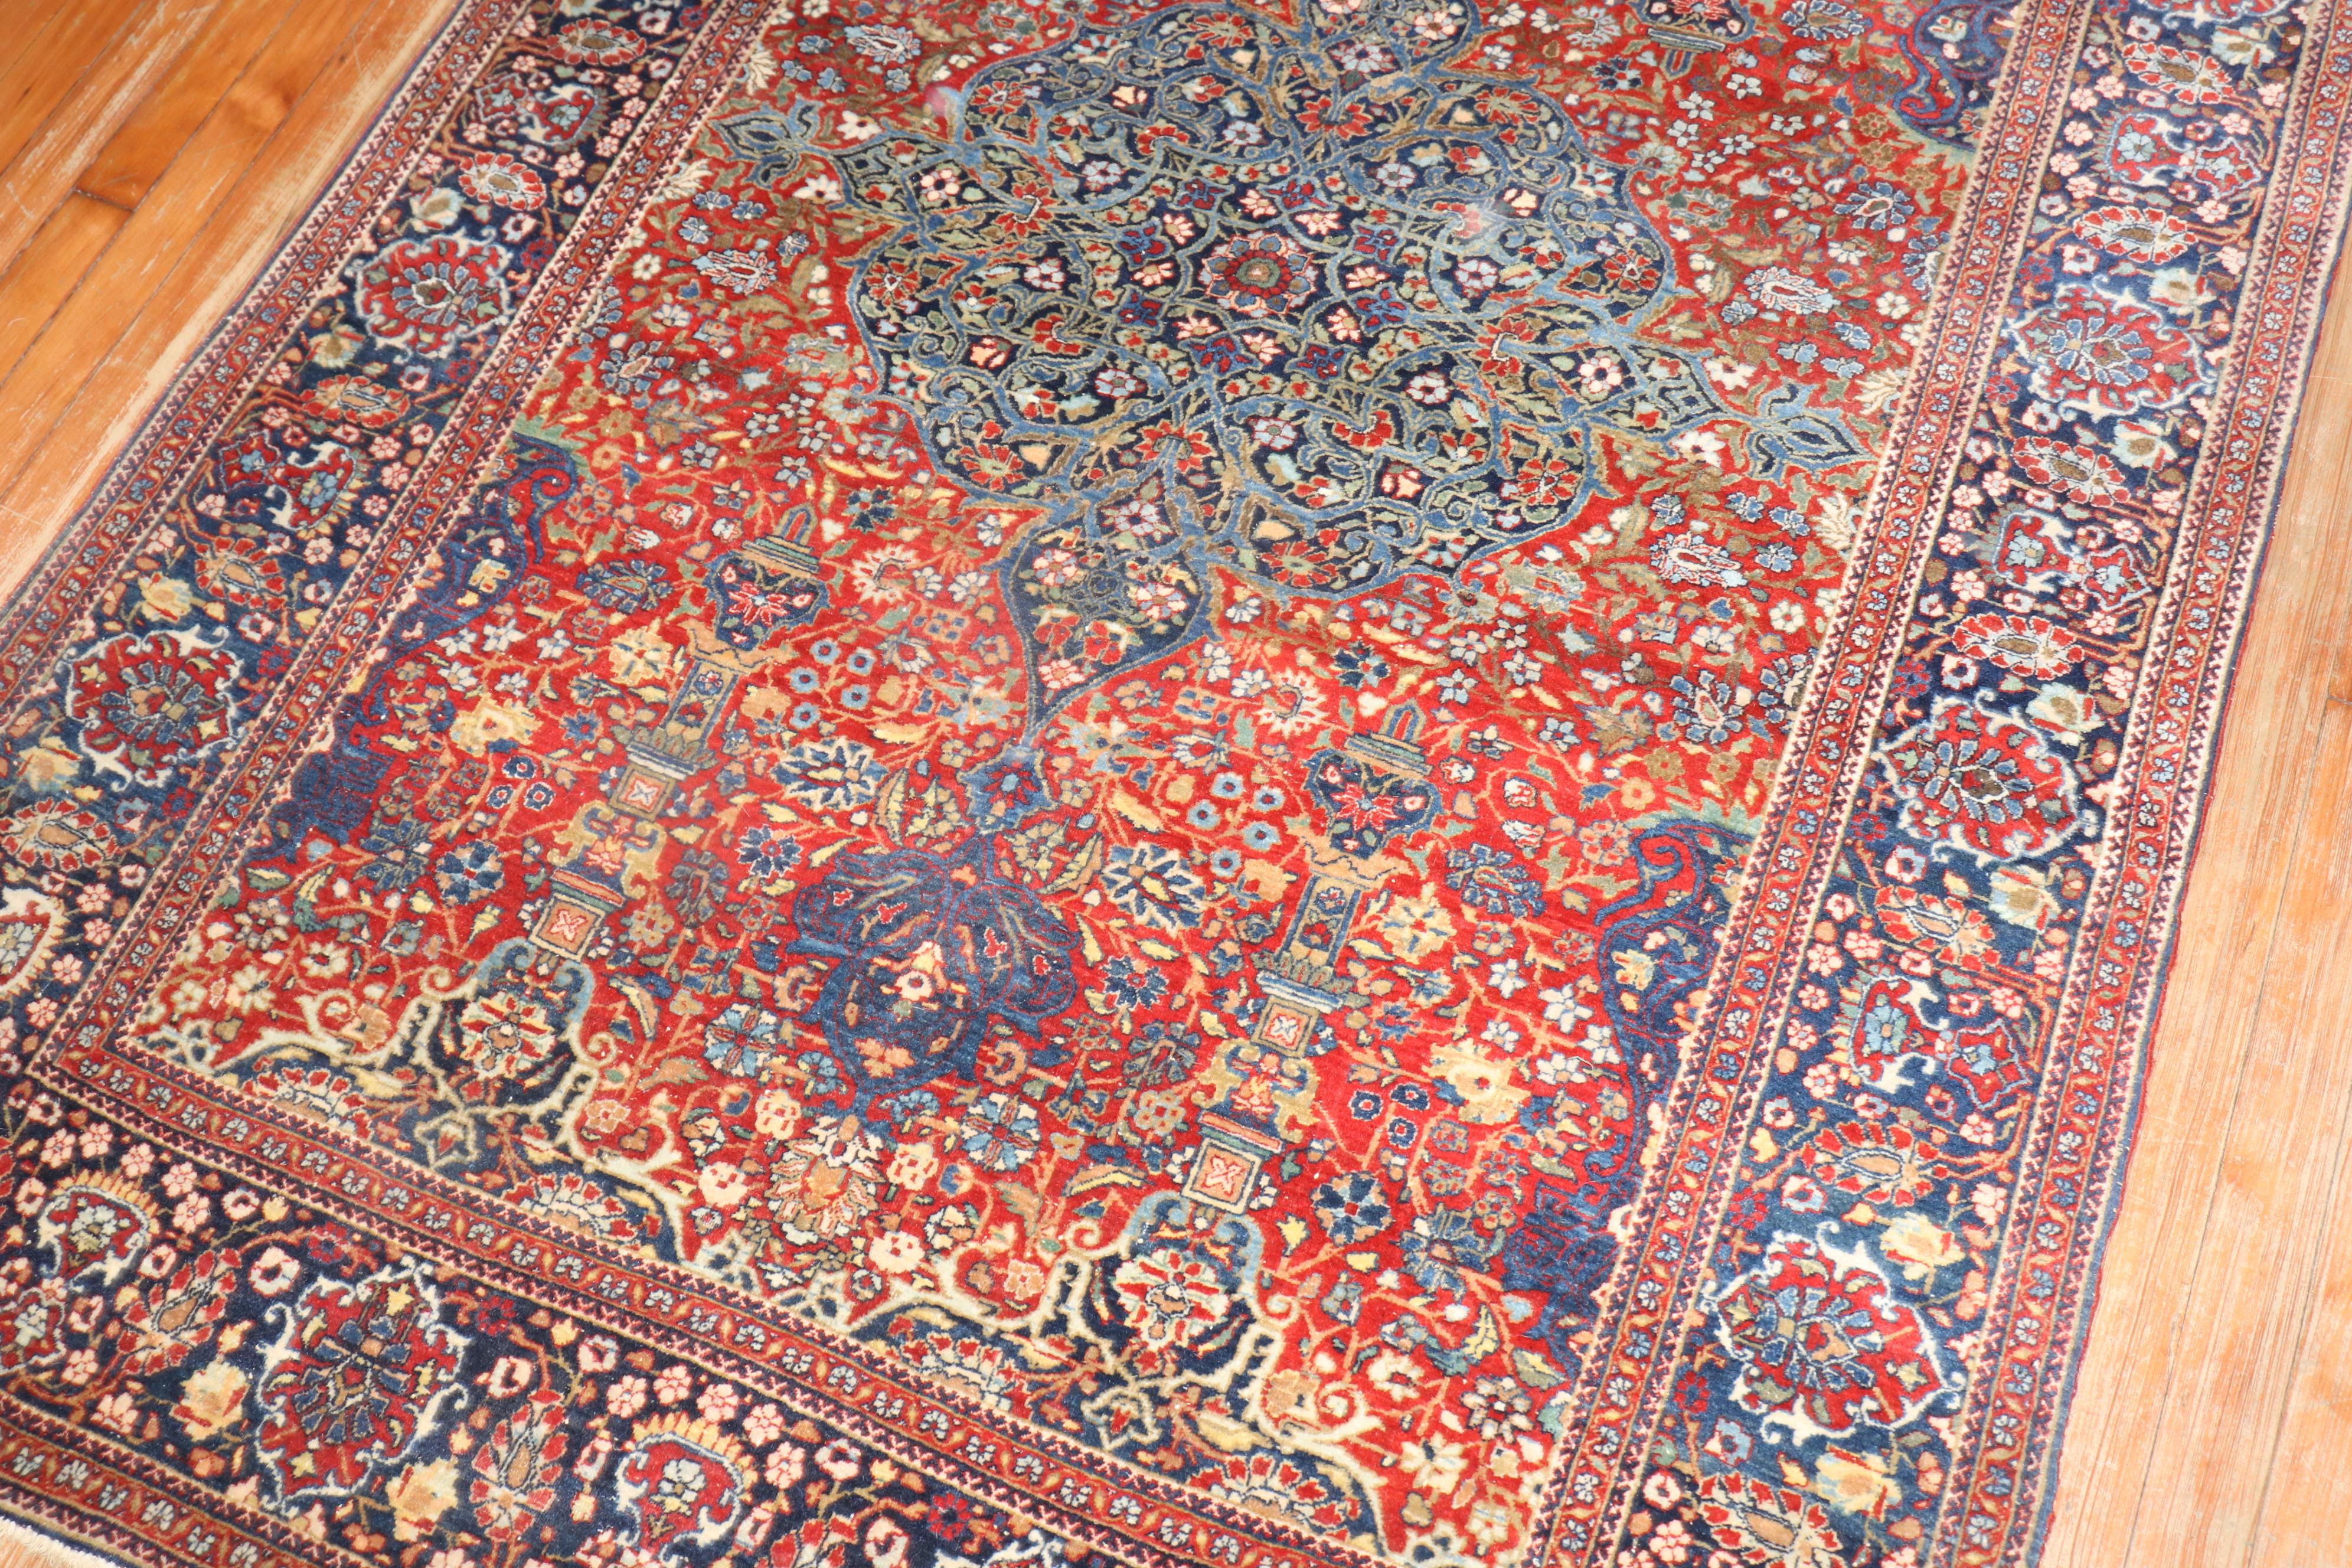 Hand-Woven Collector Level Antique Persian Kashan Rug